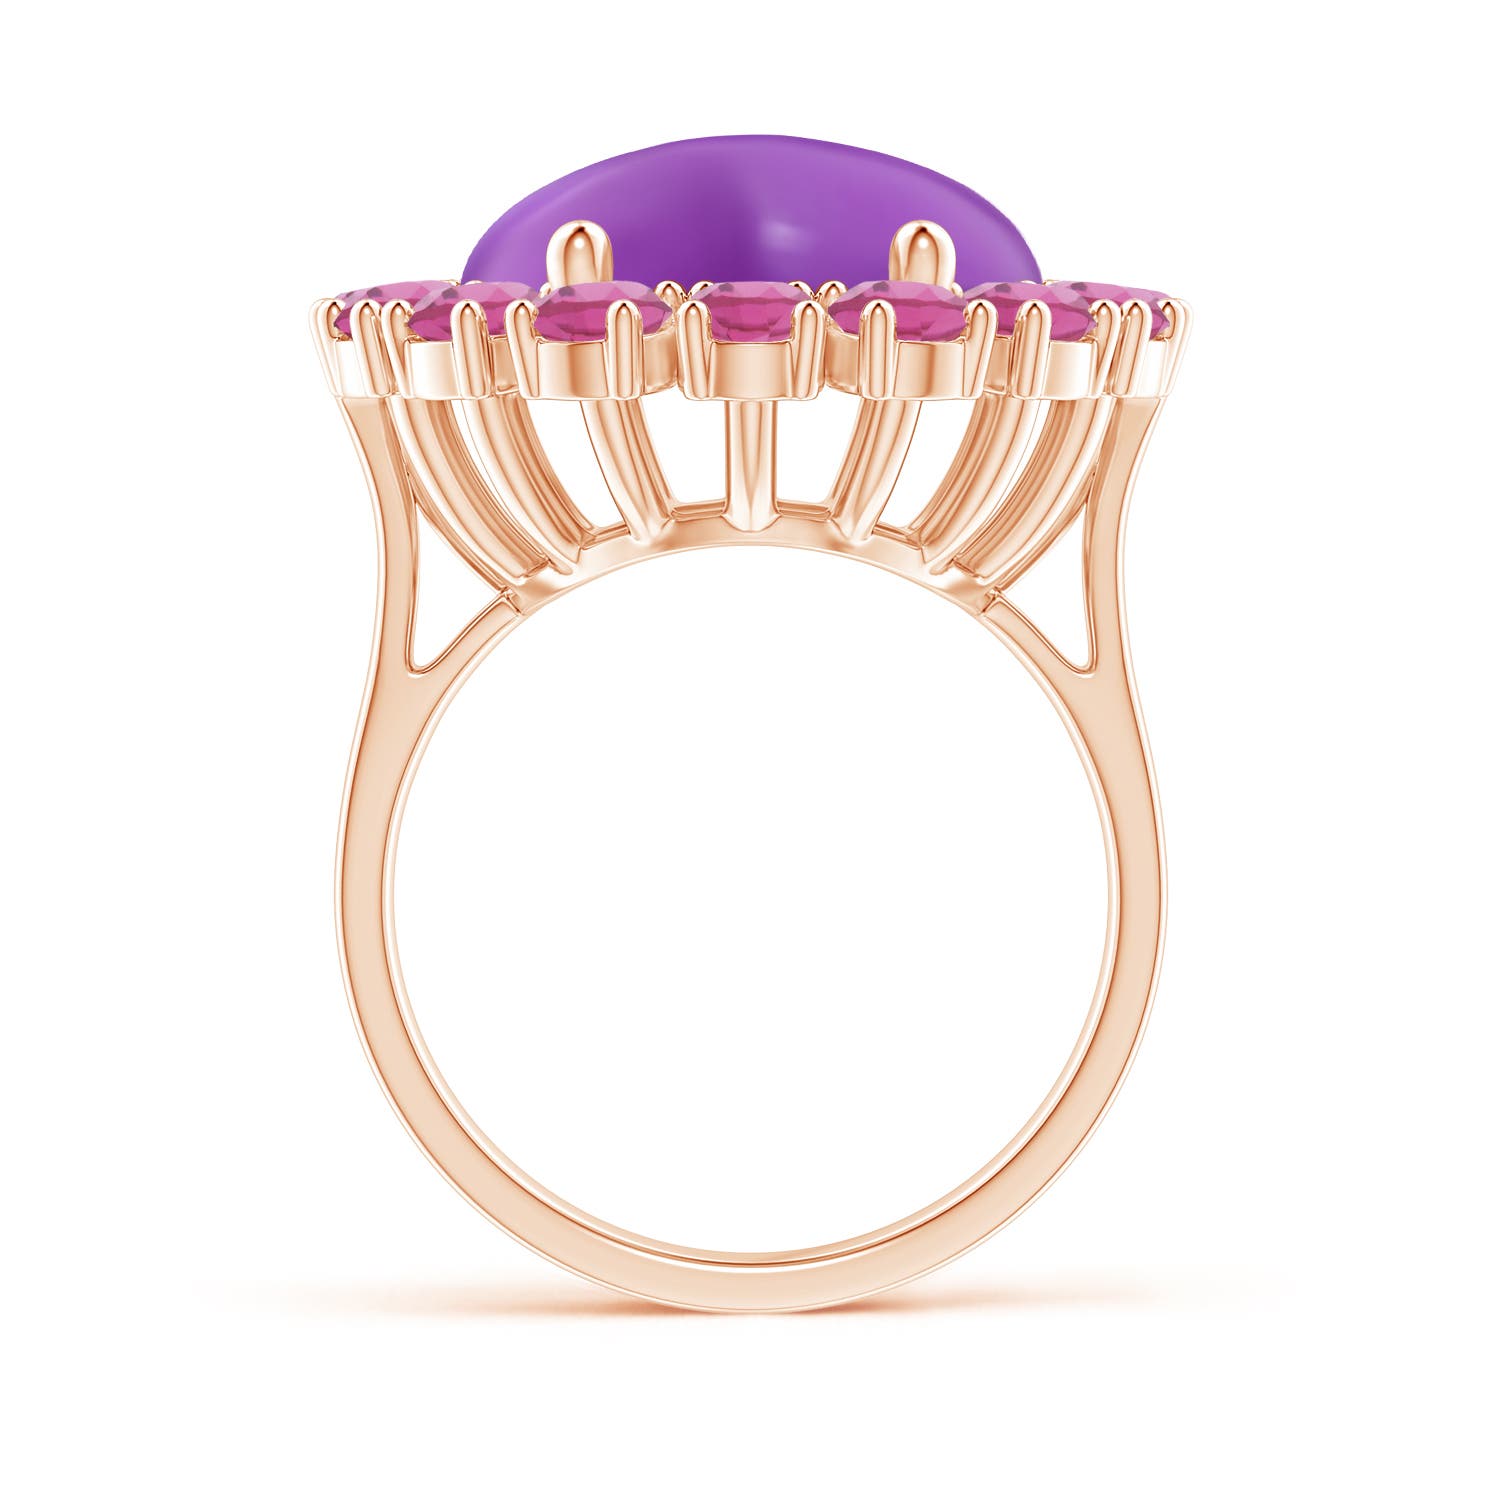 AAA - Amethyst / 13.56 CT / 14 KT Rose Gold